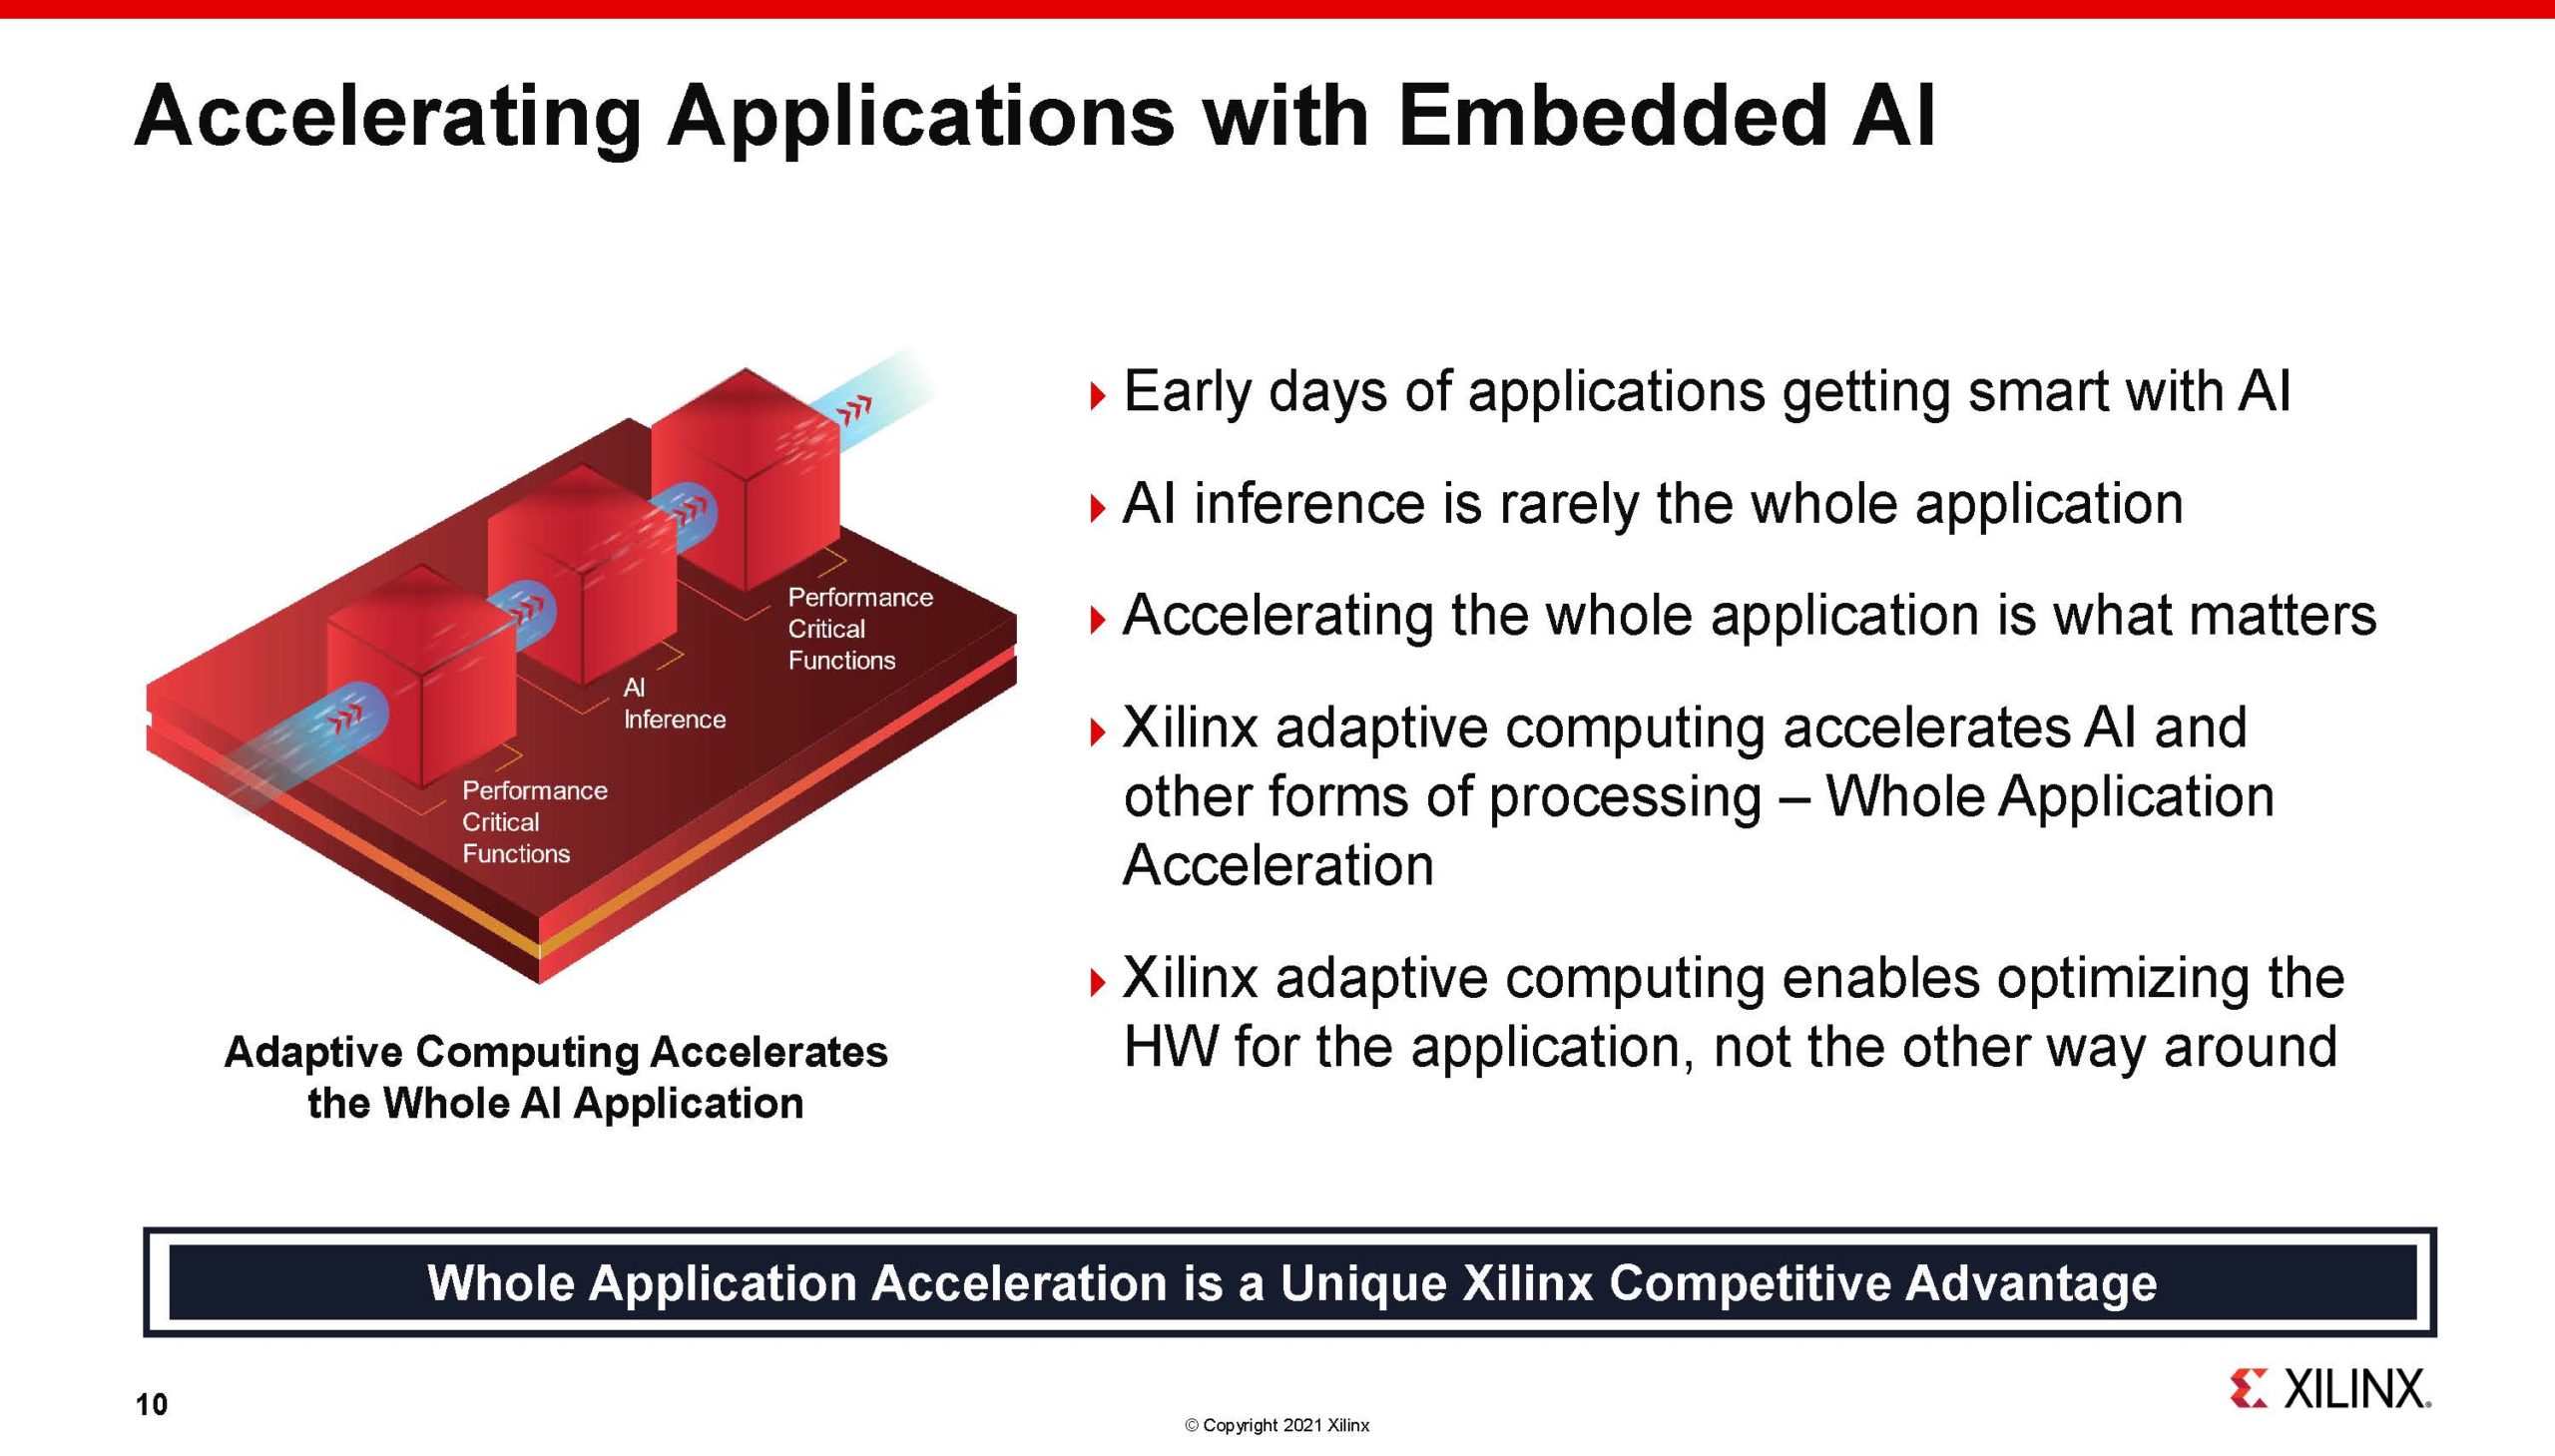 Xilinx Victor Peng 1H2021 Accelerating Applications With Embedded AI